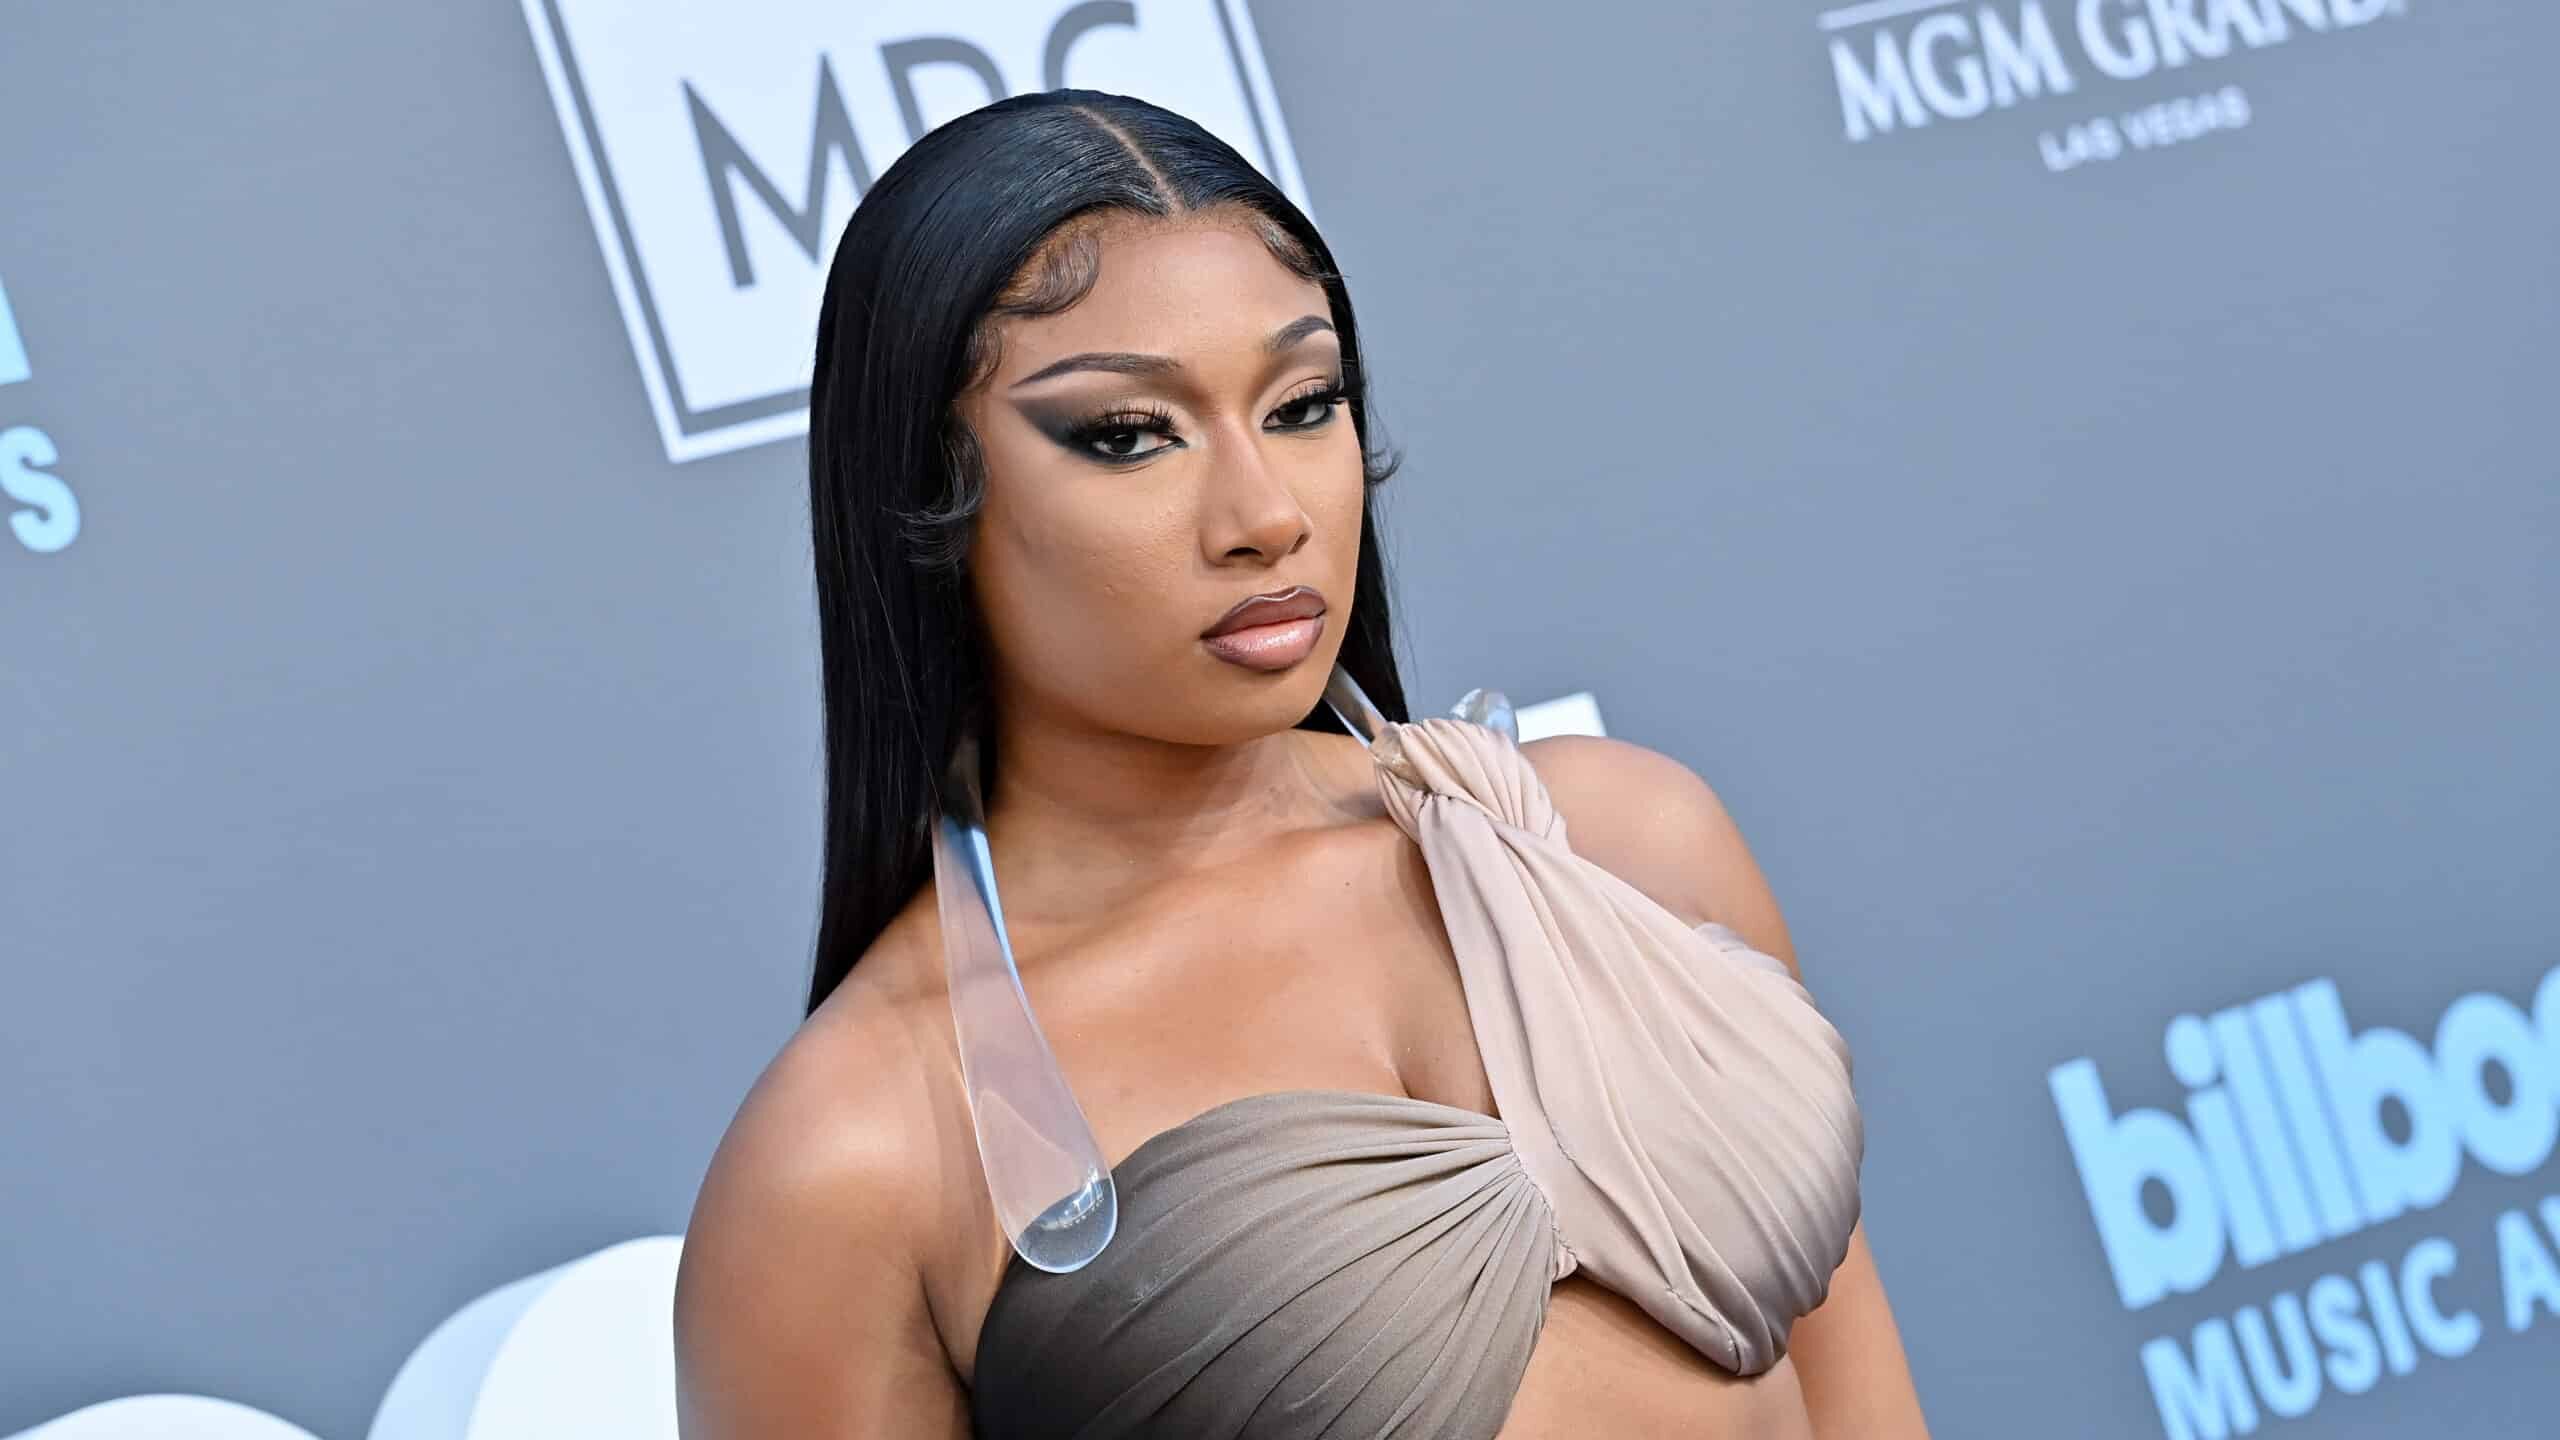 Megan Thee Stallion attends the 2022 Billboard Music Awards at MGM Grand Garden Arena on May 15, 2022 in Las Vegas, Nevada.